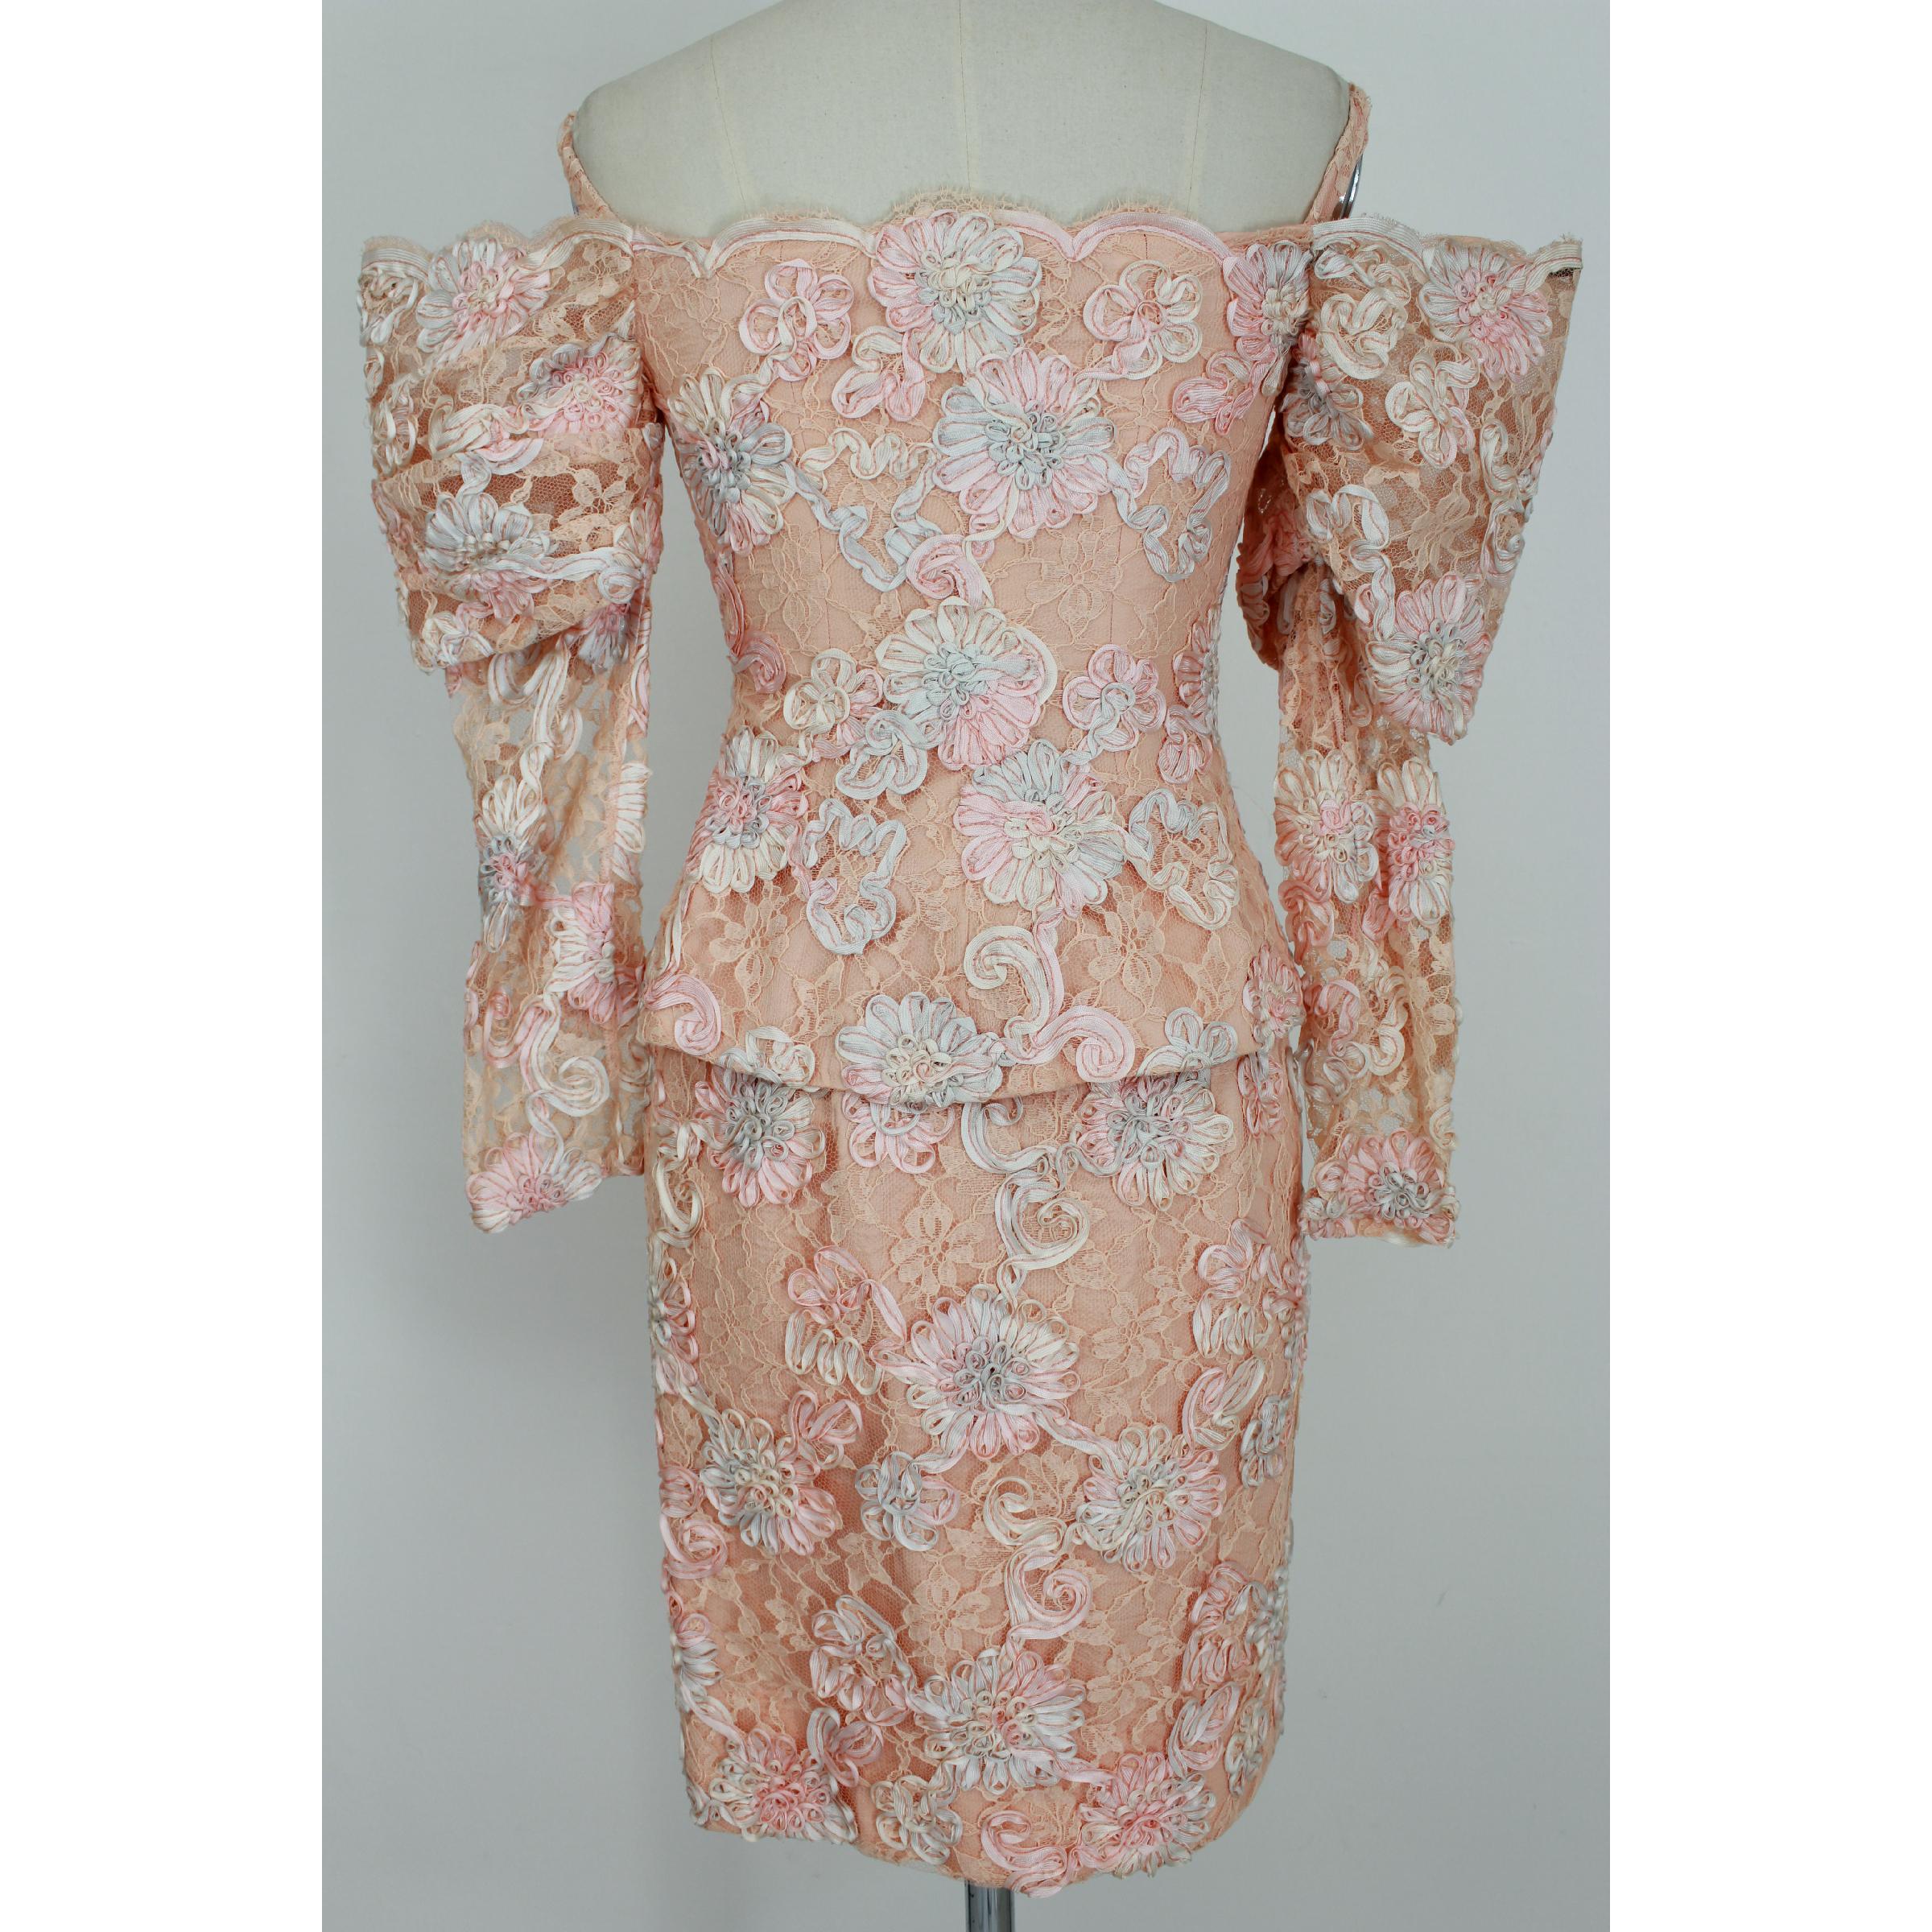 Lanvin Paris 70s vintage dress. Jacket and skirt set, 70% rayon 24% cotton 6% nylon, pink. Bodice with chopsticks, long balloon lace sleeves, floral pattern, sheath model skirt. Made in France. Excellent vintage condition. 

Size: 44 It 10 Us 12 Uk